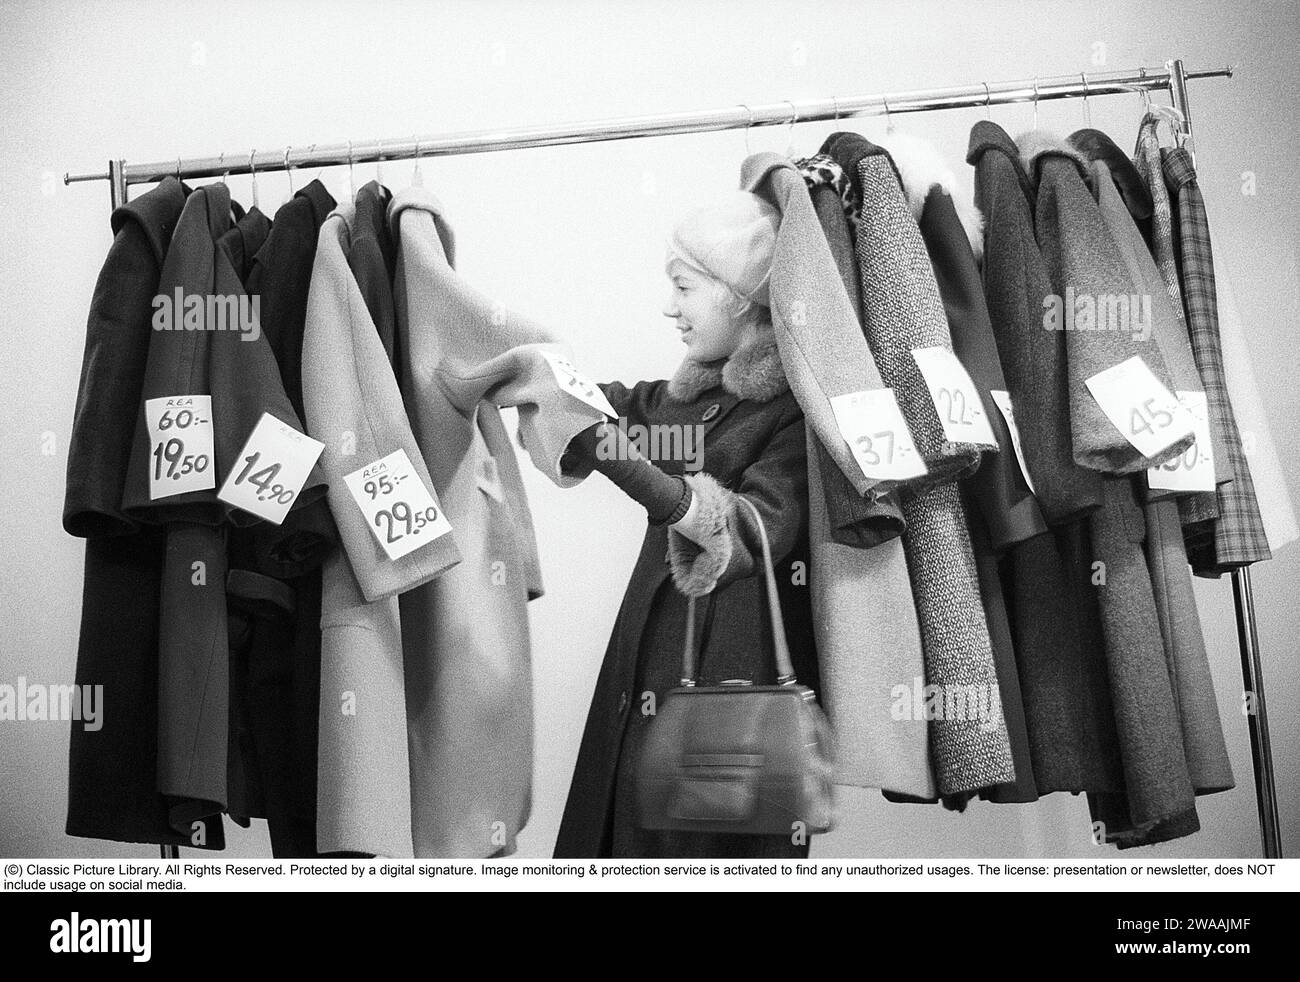 How Much Did Clothes Cost in the 1960s? Discover the Prices!